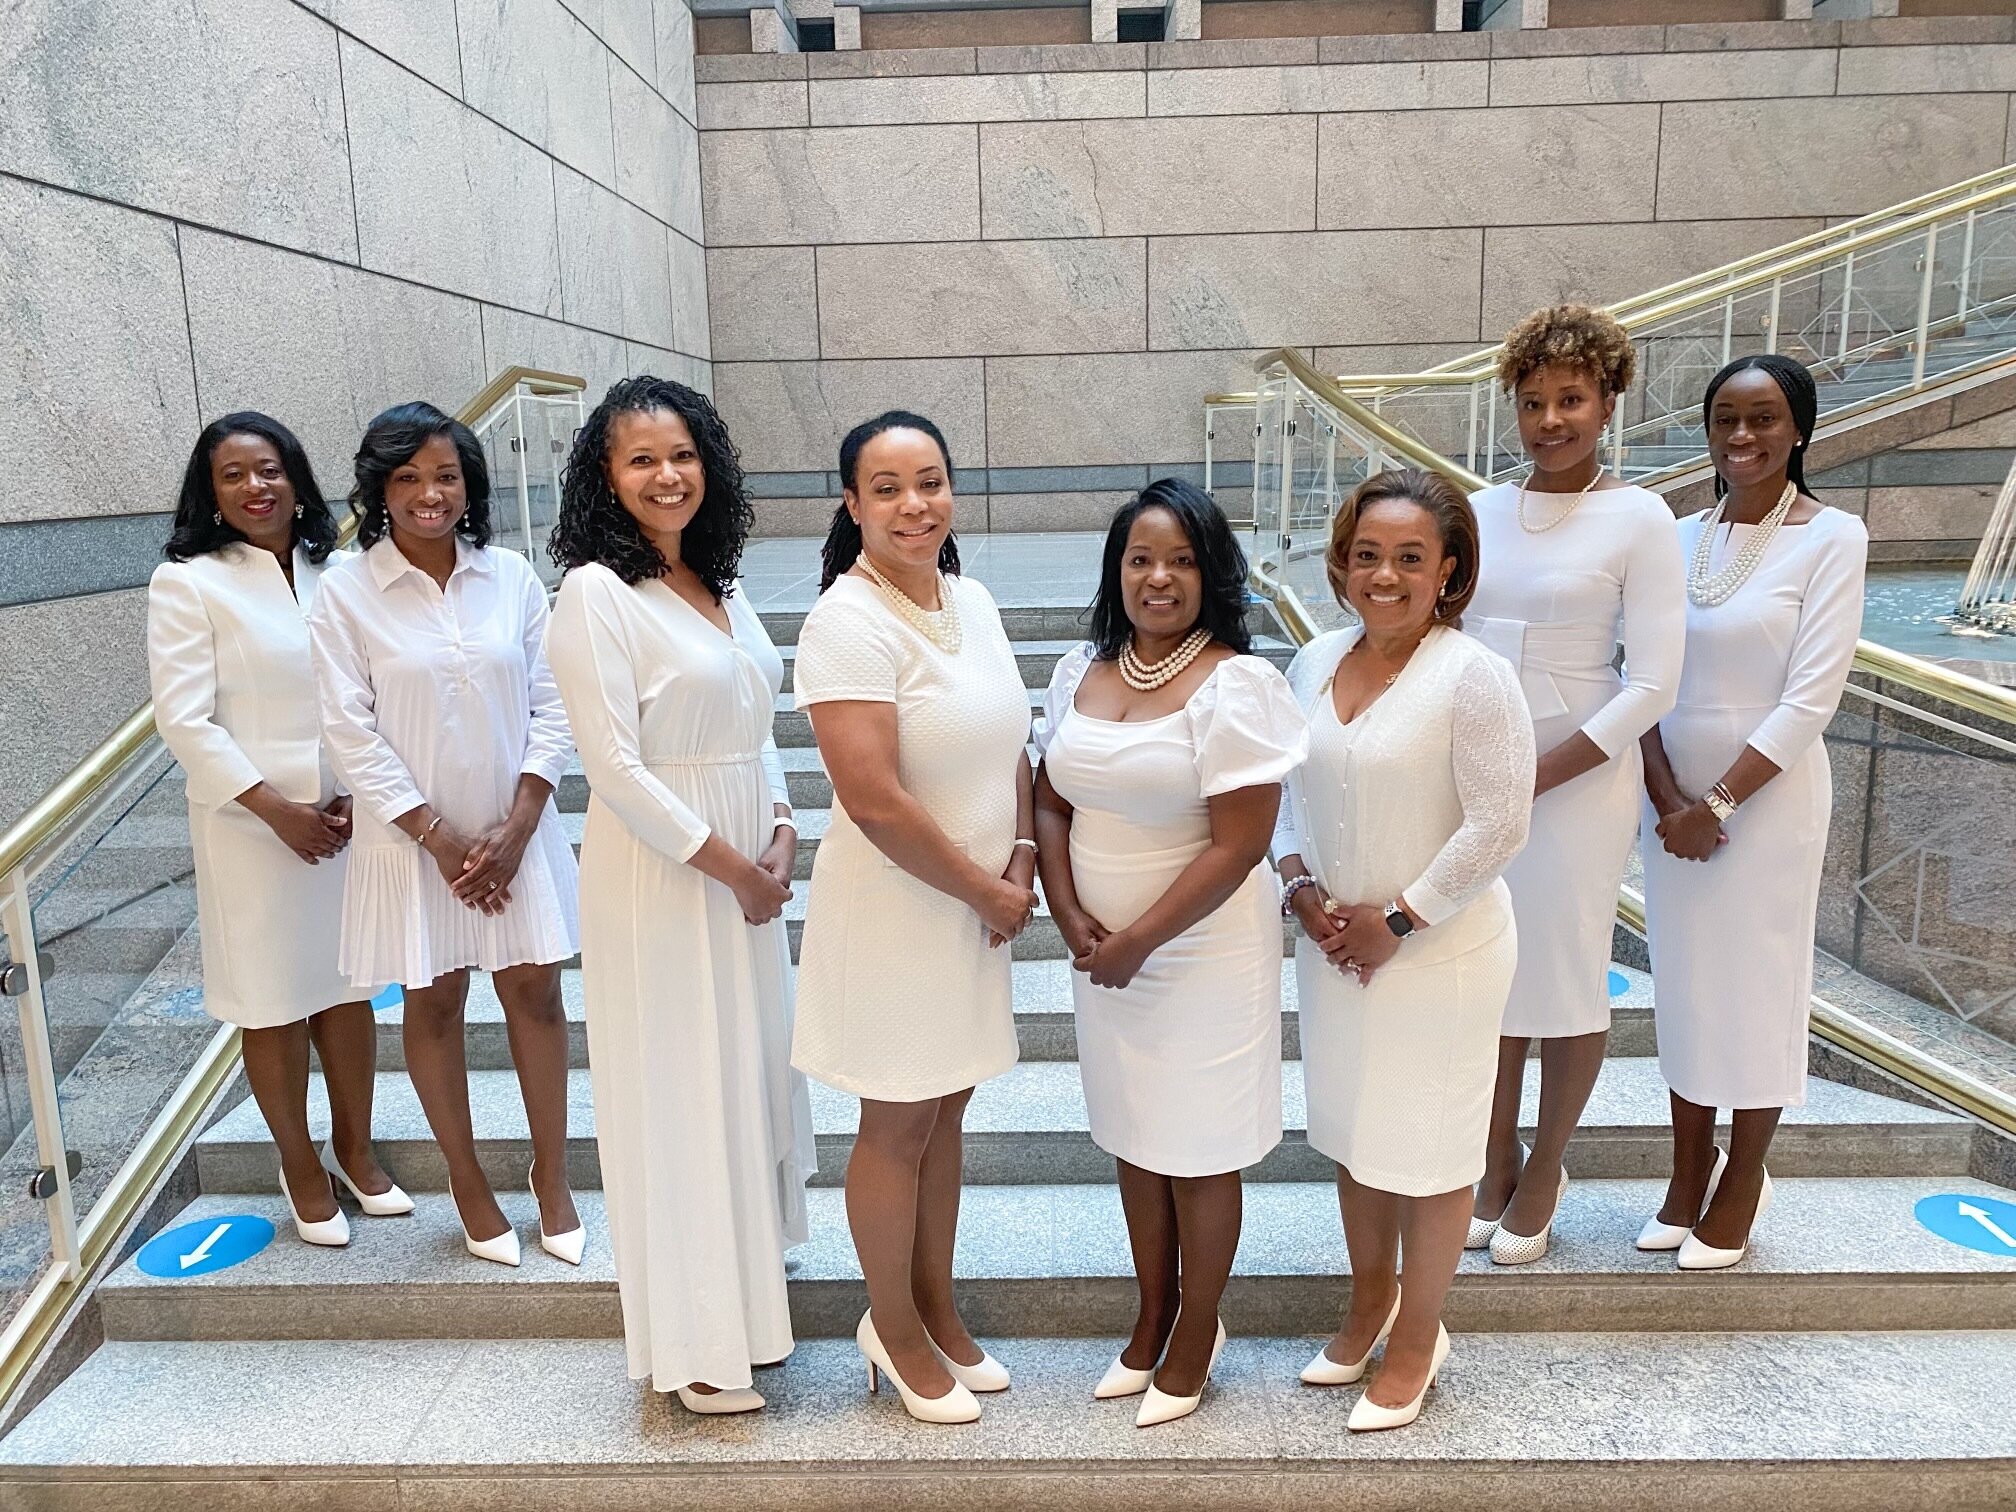 Nation's Capital Chapter of Jack and Jill of America, Inc.